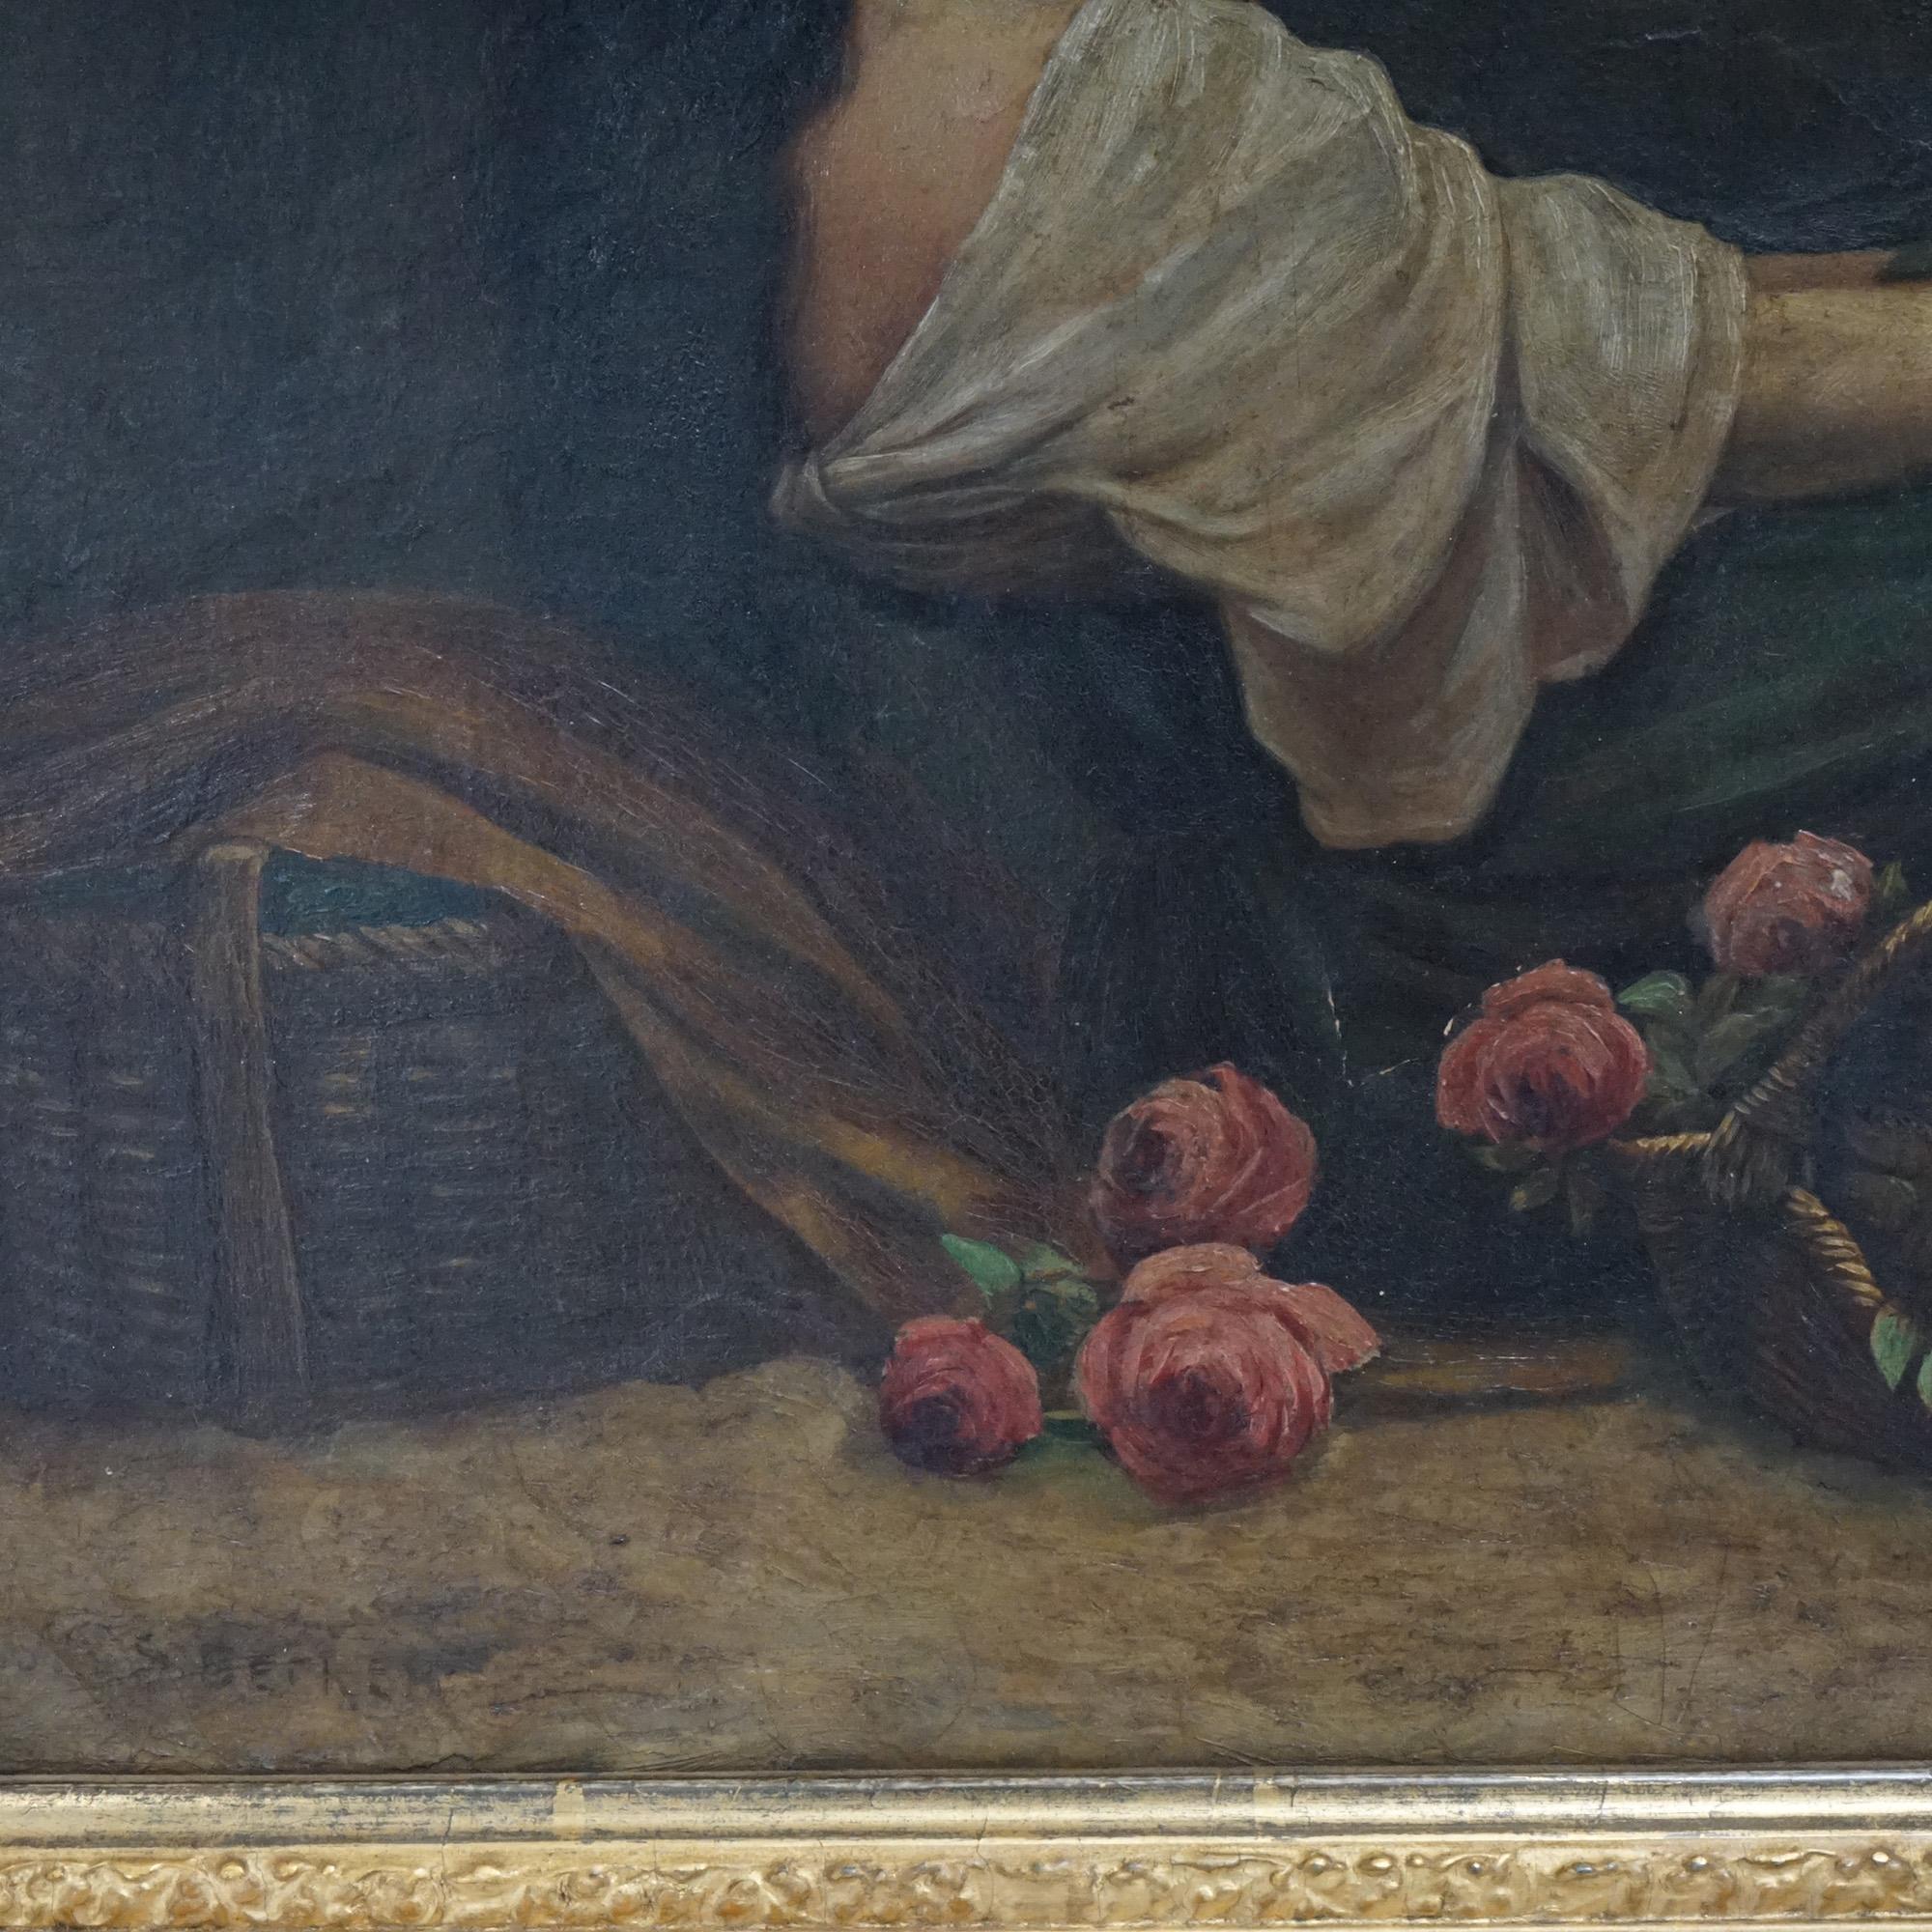 European Antique Continental Oil Painting of Woman with Flowers, Artist Signed, 19th C